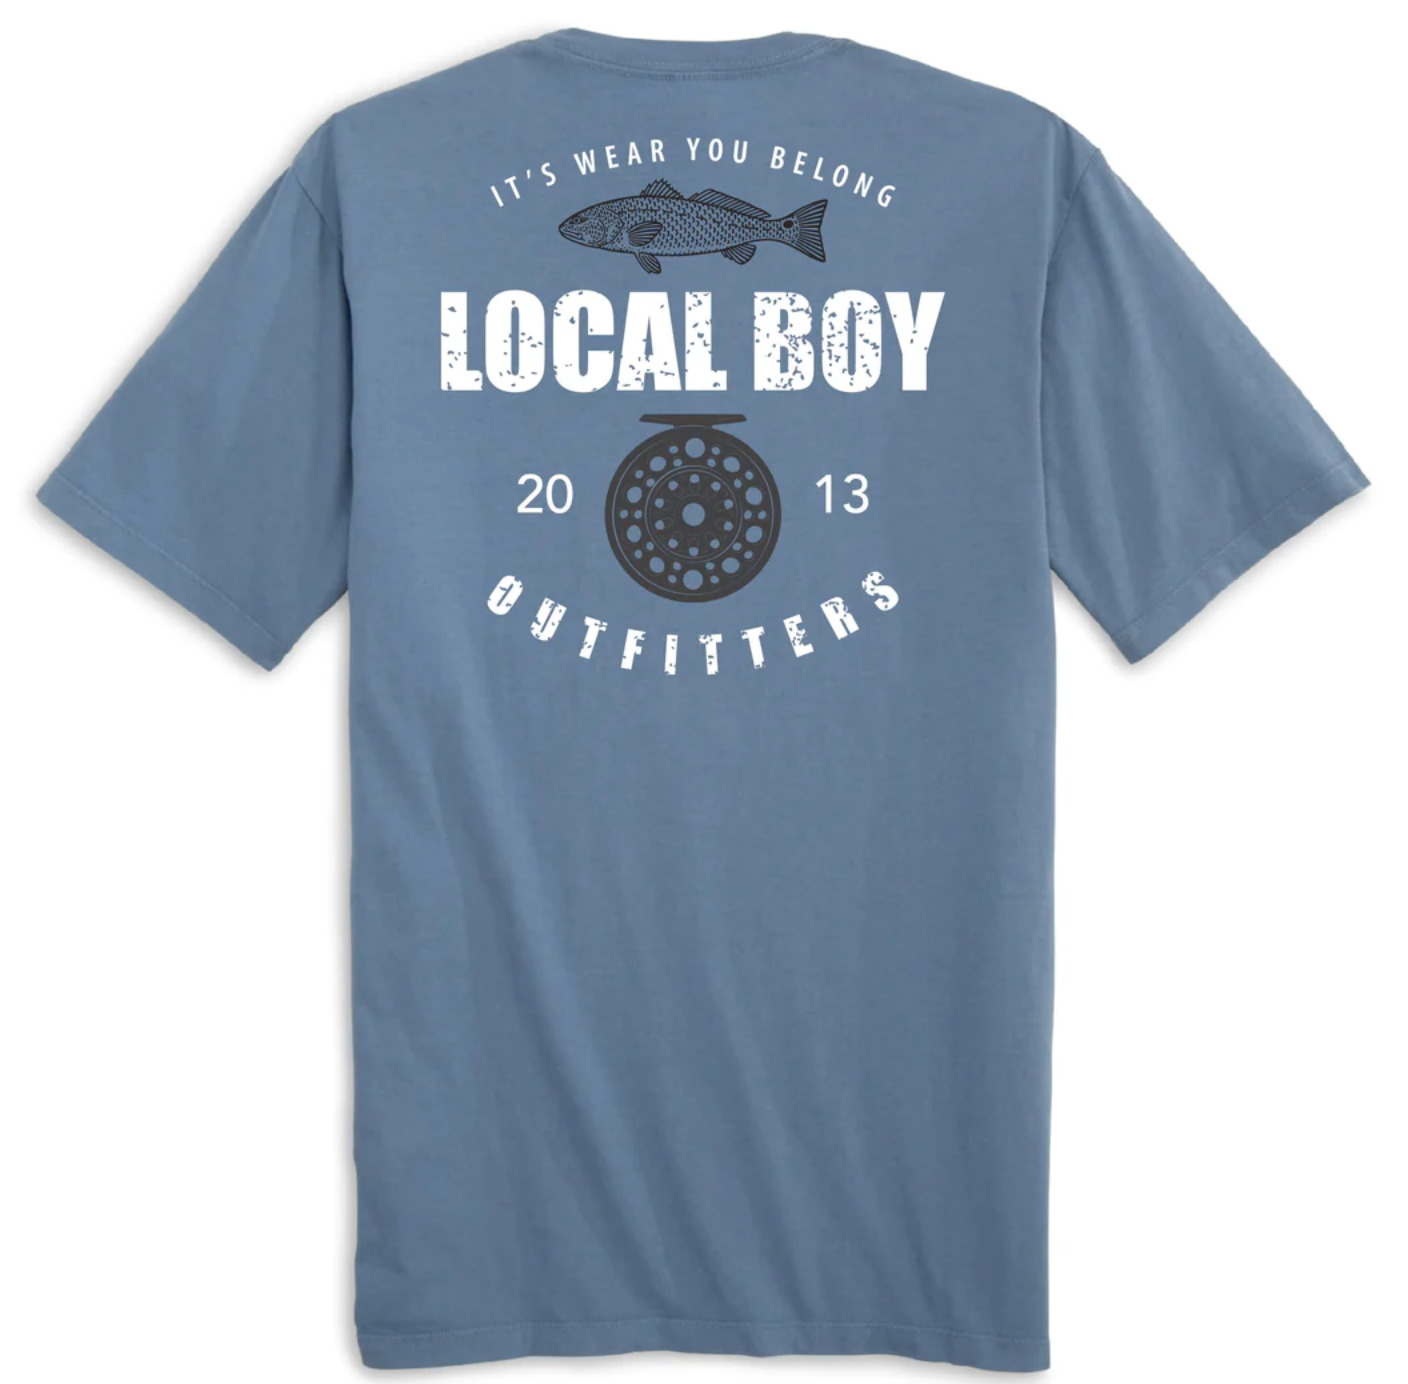 Fishing Shirts – Local Boy Outfitters